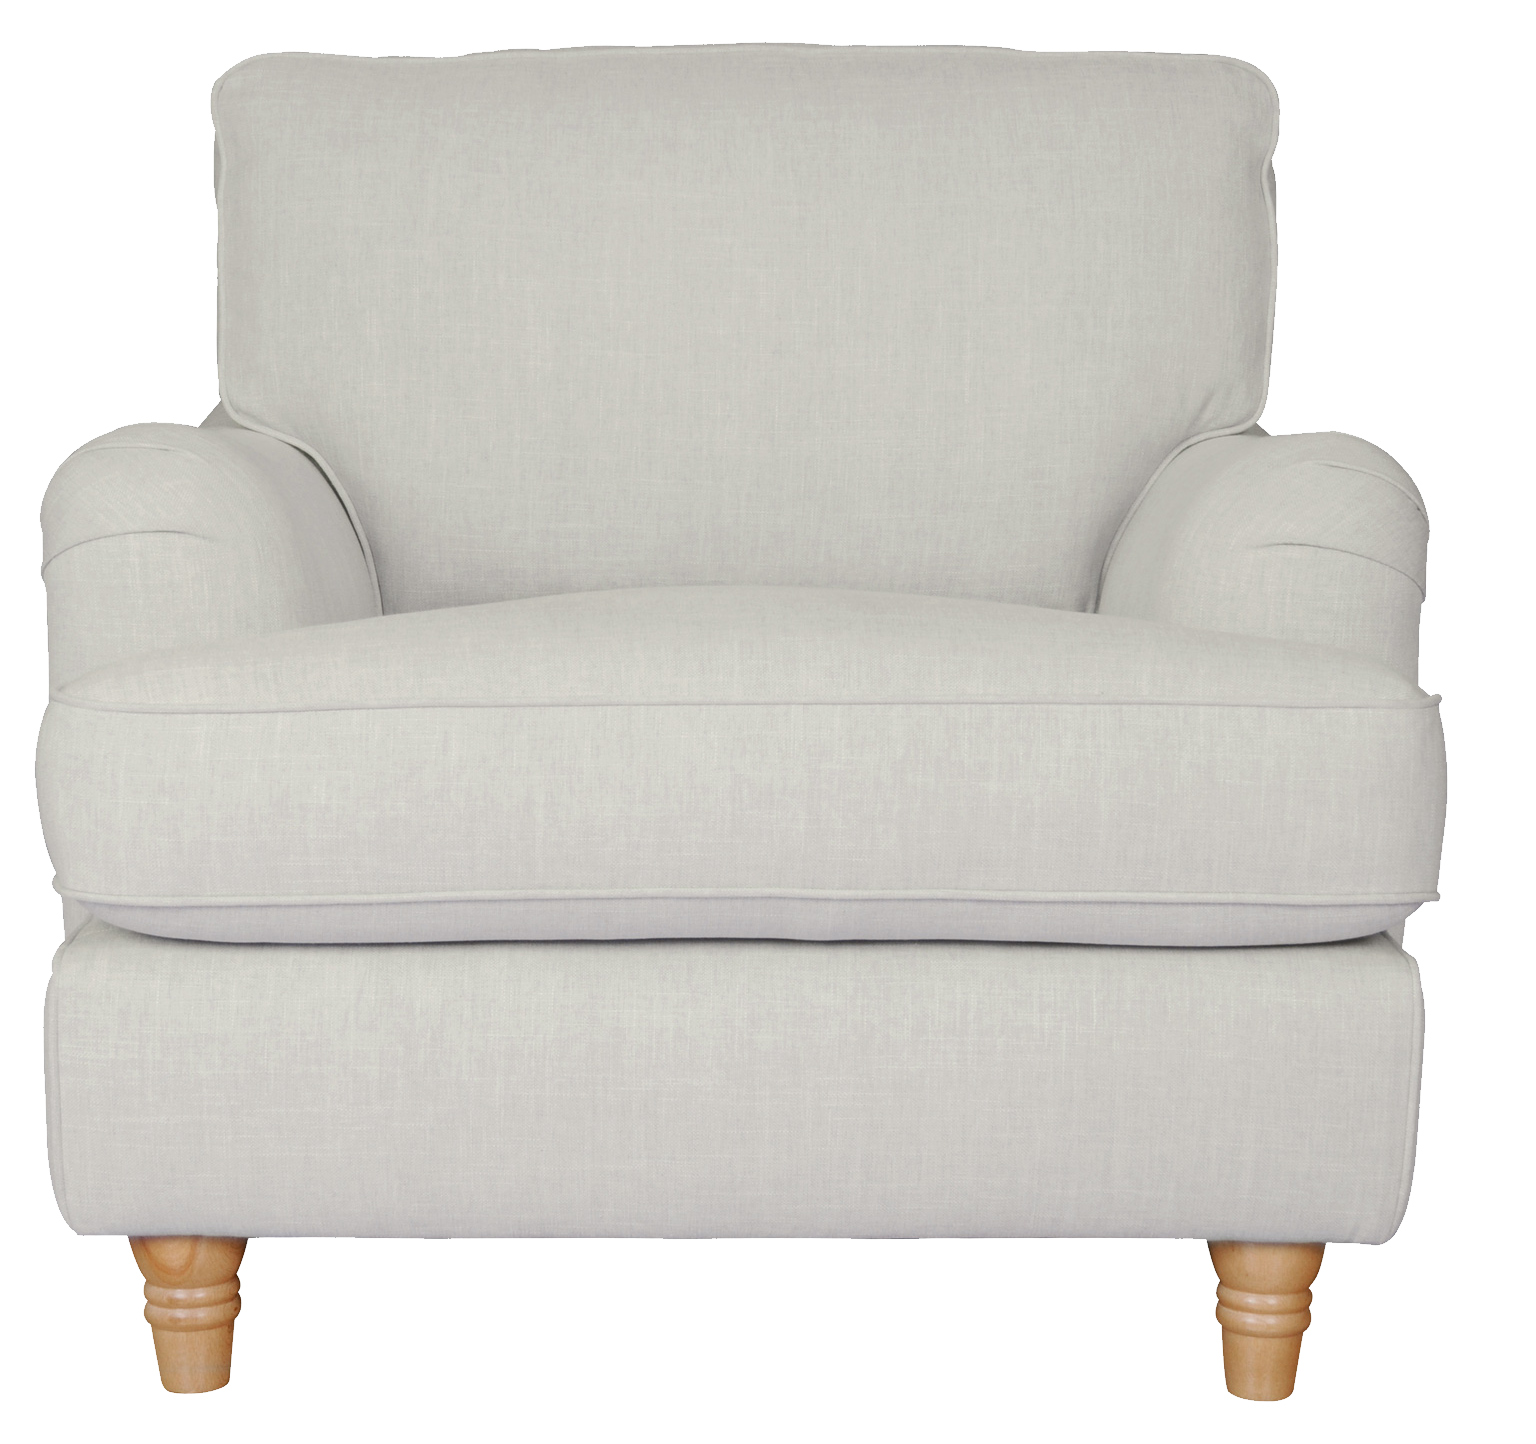 Grey Armchair PNG File